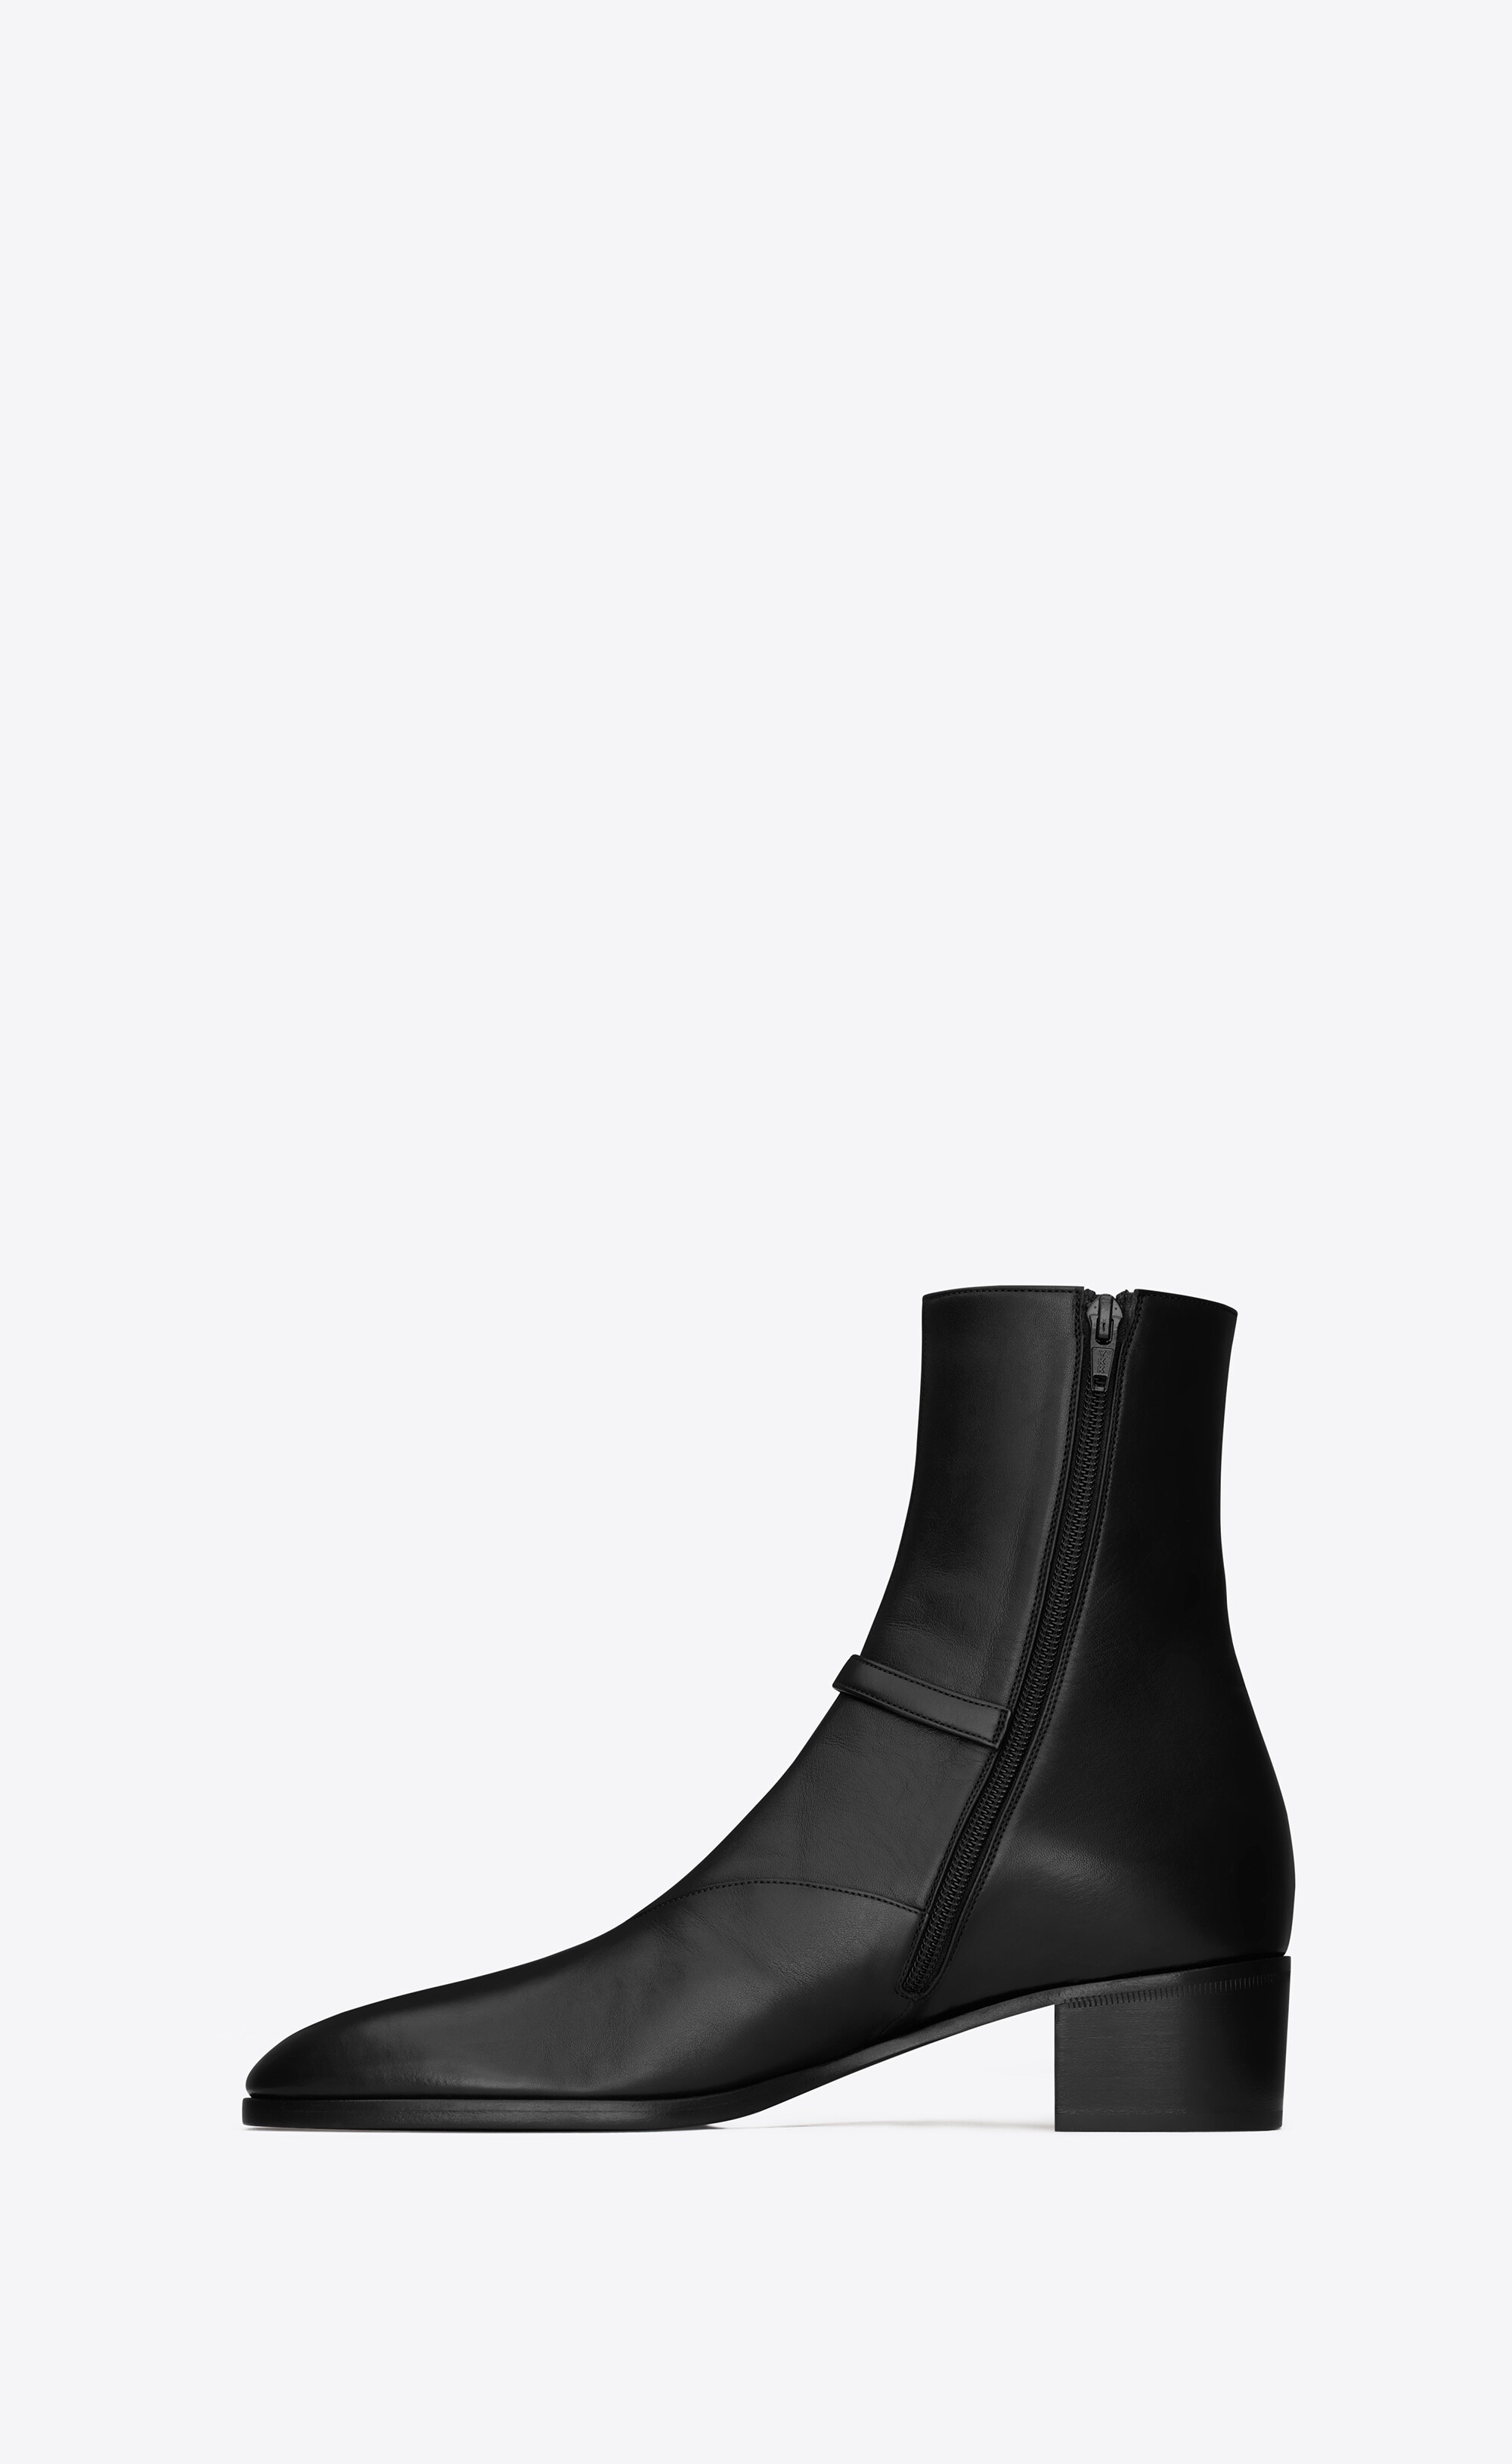 vlad zipped boots in smooth leather - 3